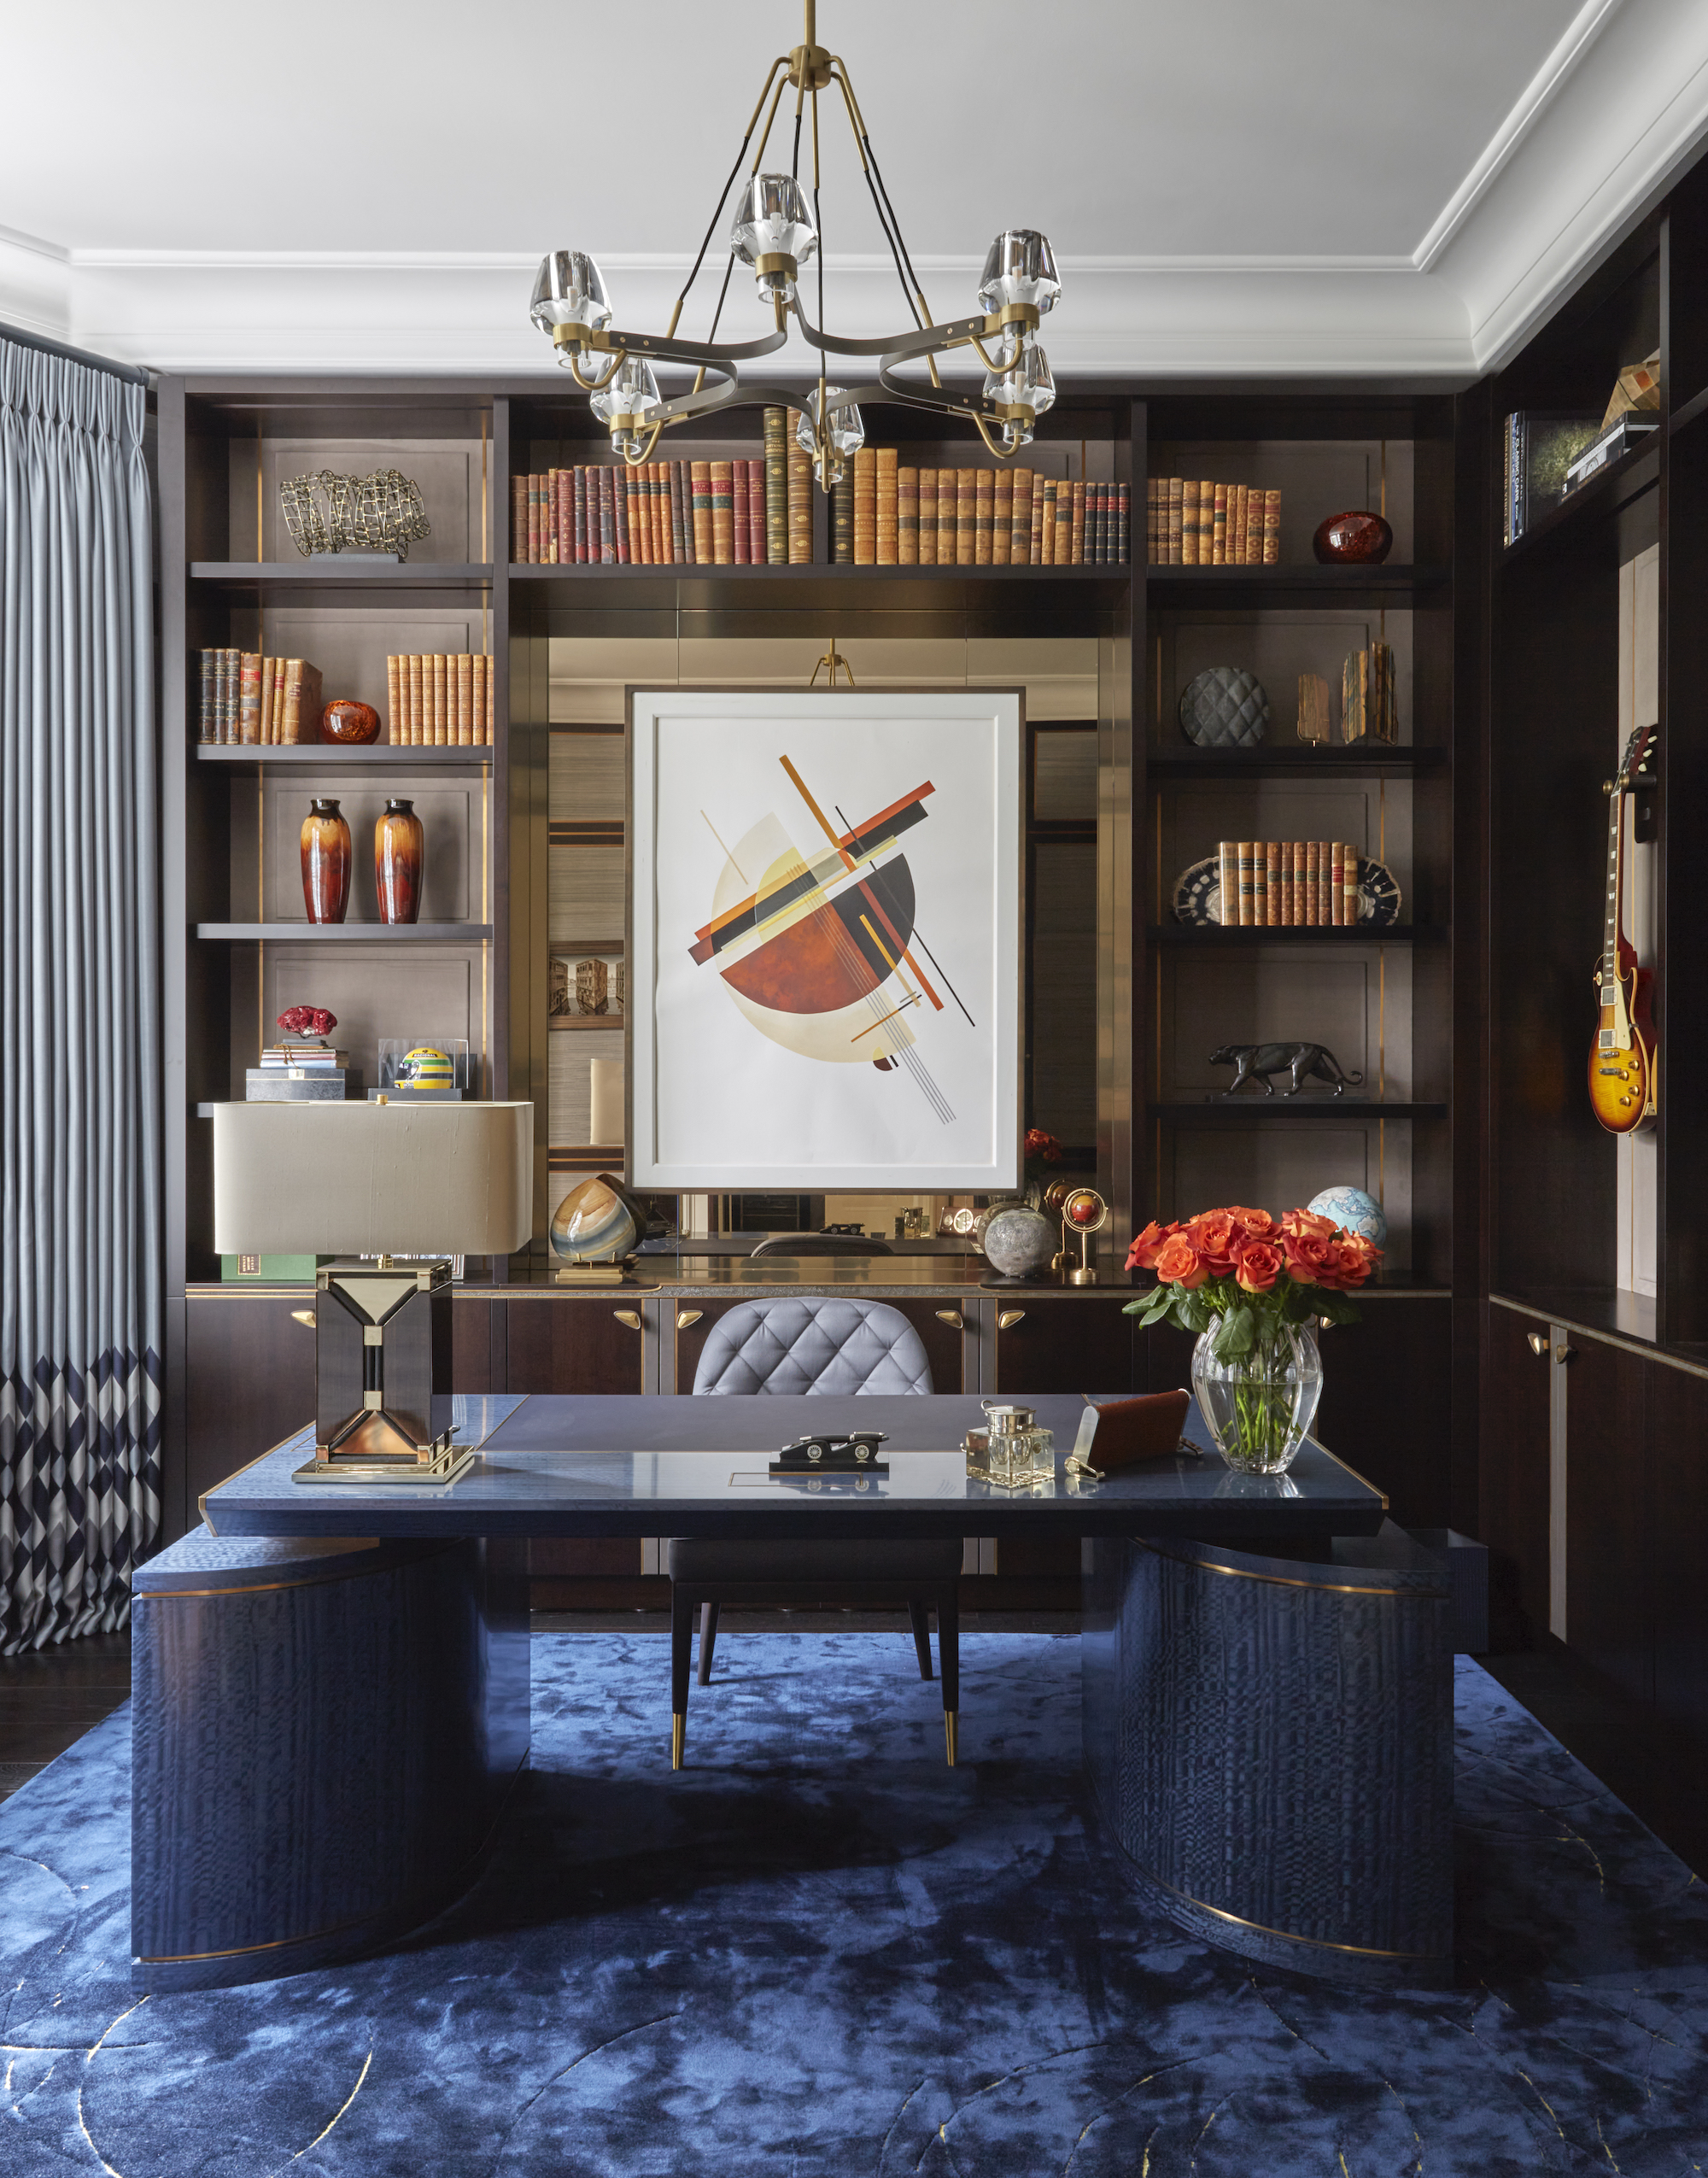 Katharine Pooley interior designed this home office in a family house in Notting Hill, London